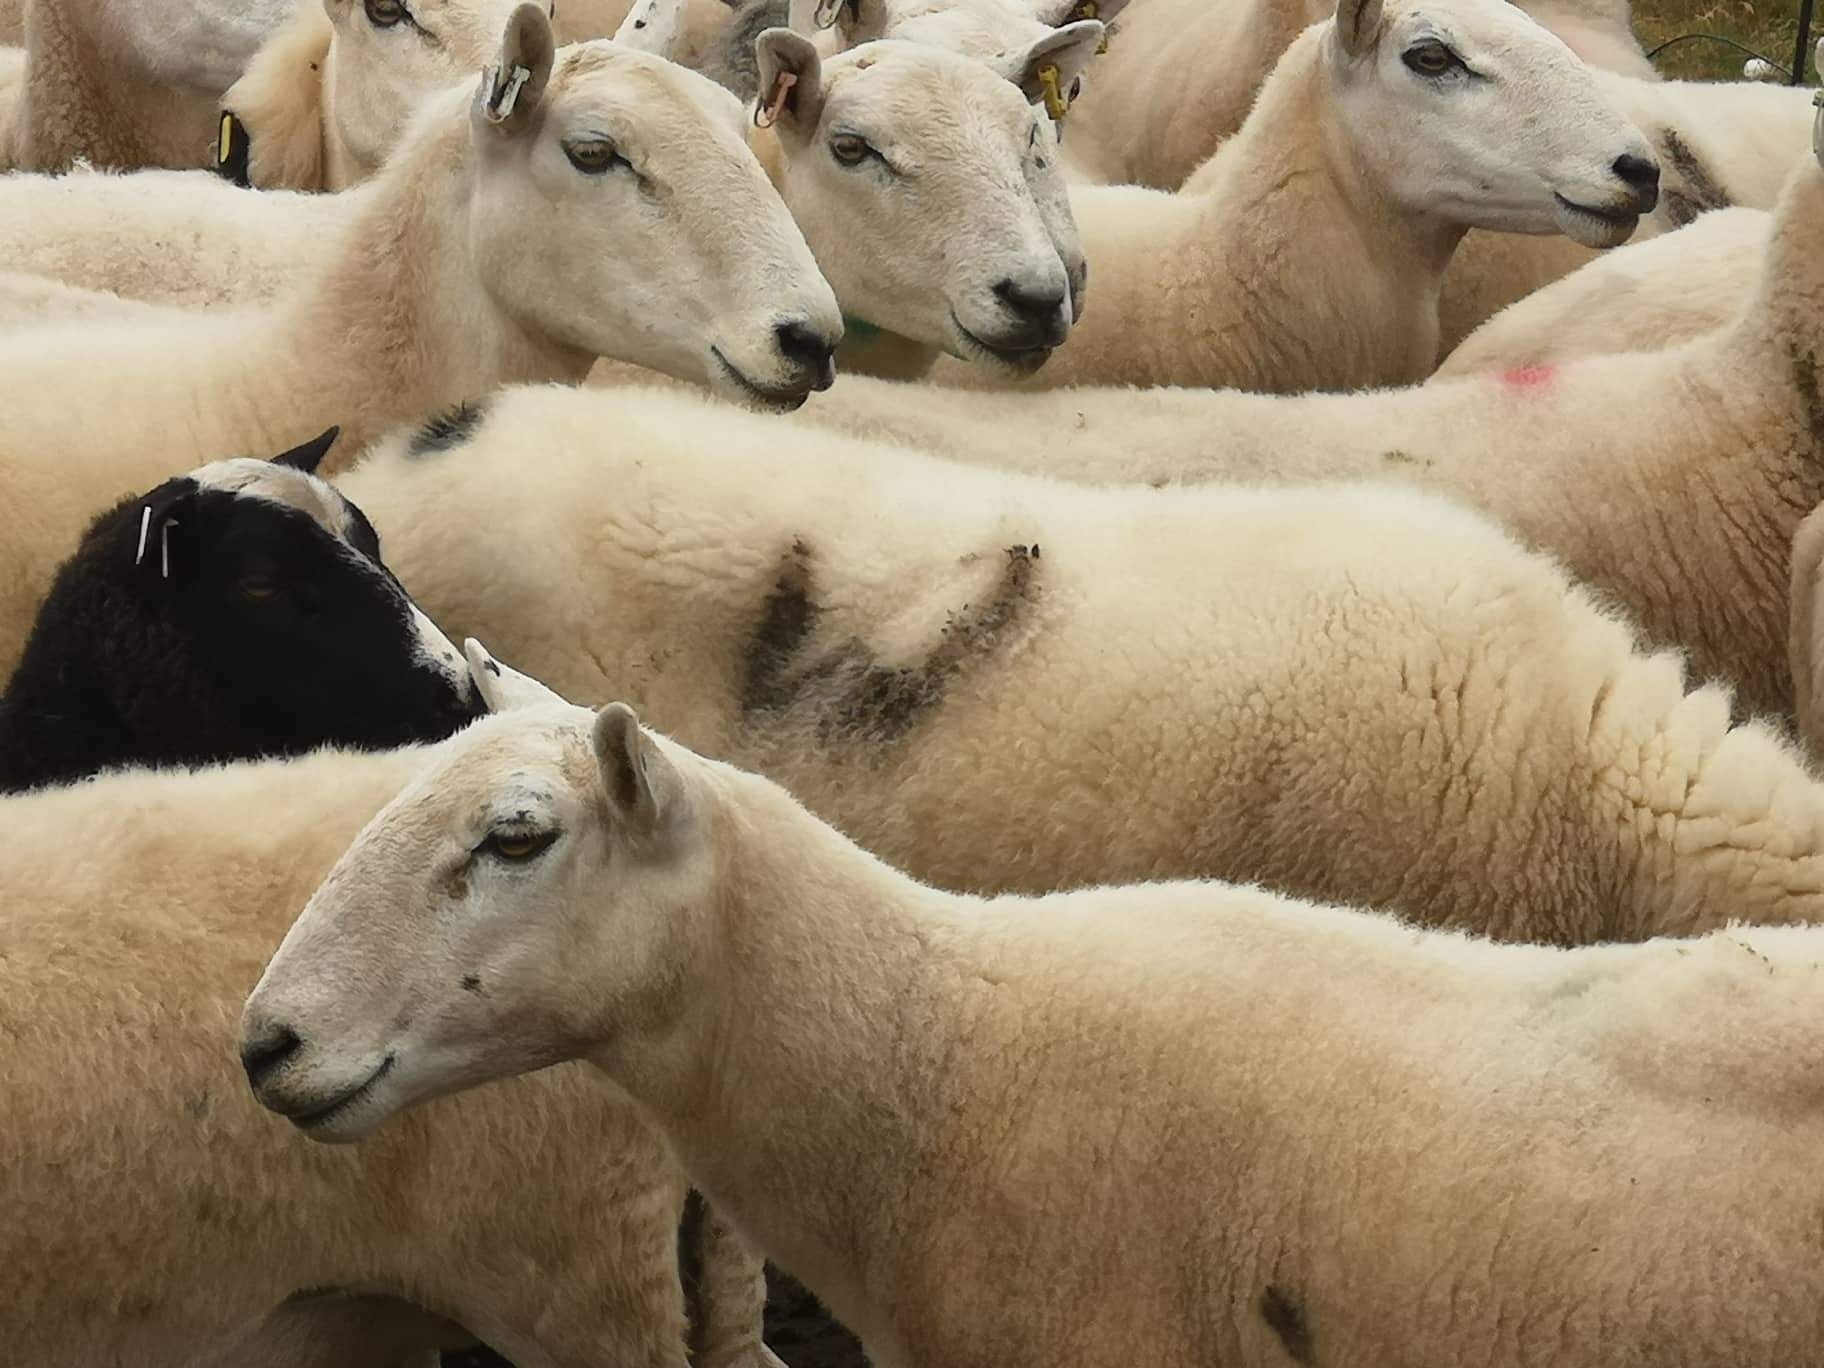 NEWS | Police appeal after more than 30 sheep were stolen from farm